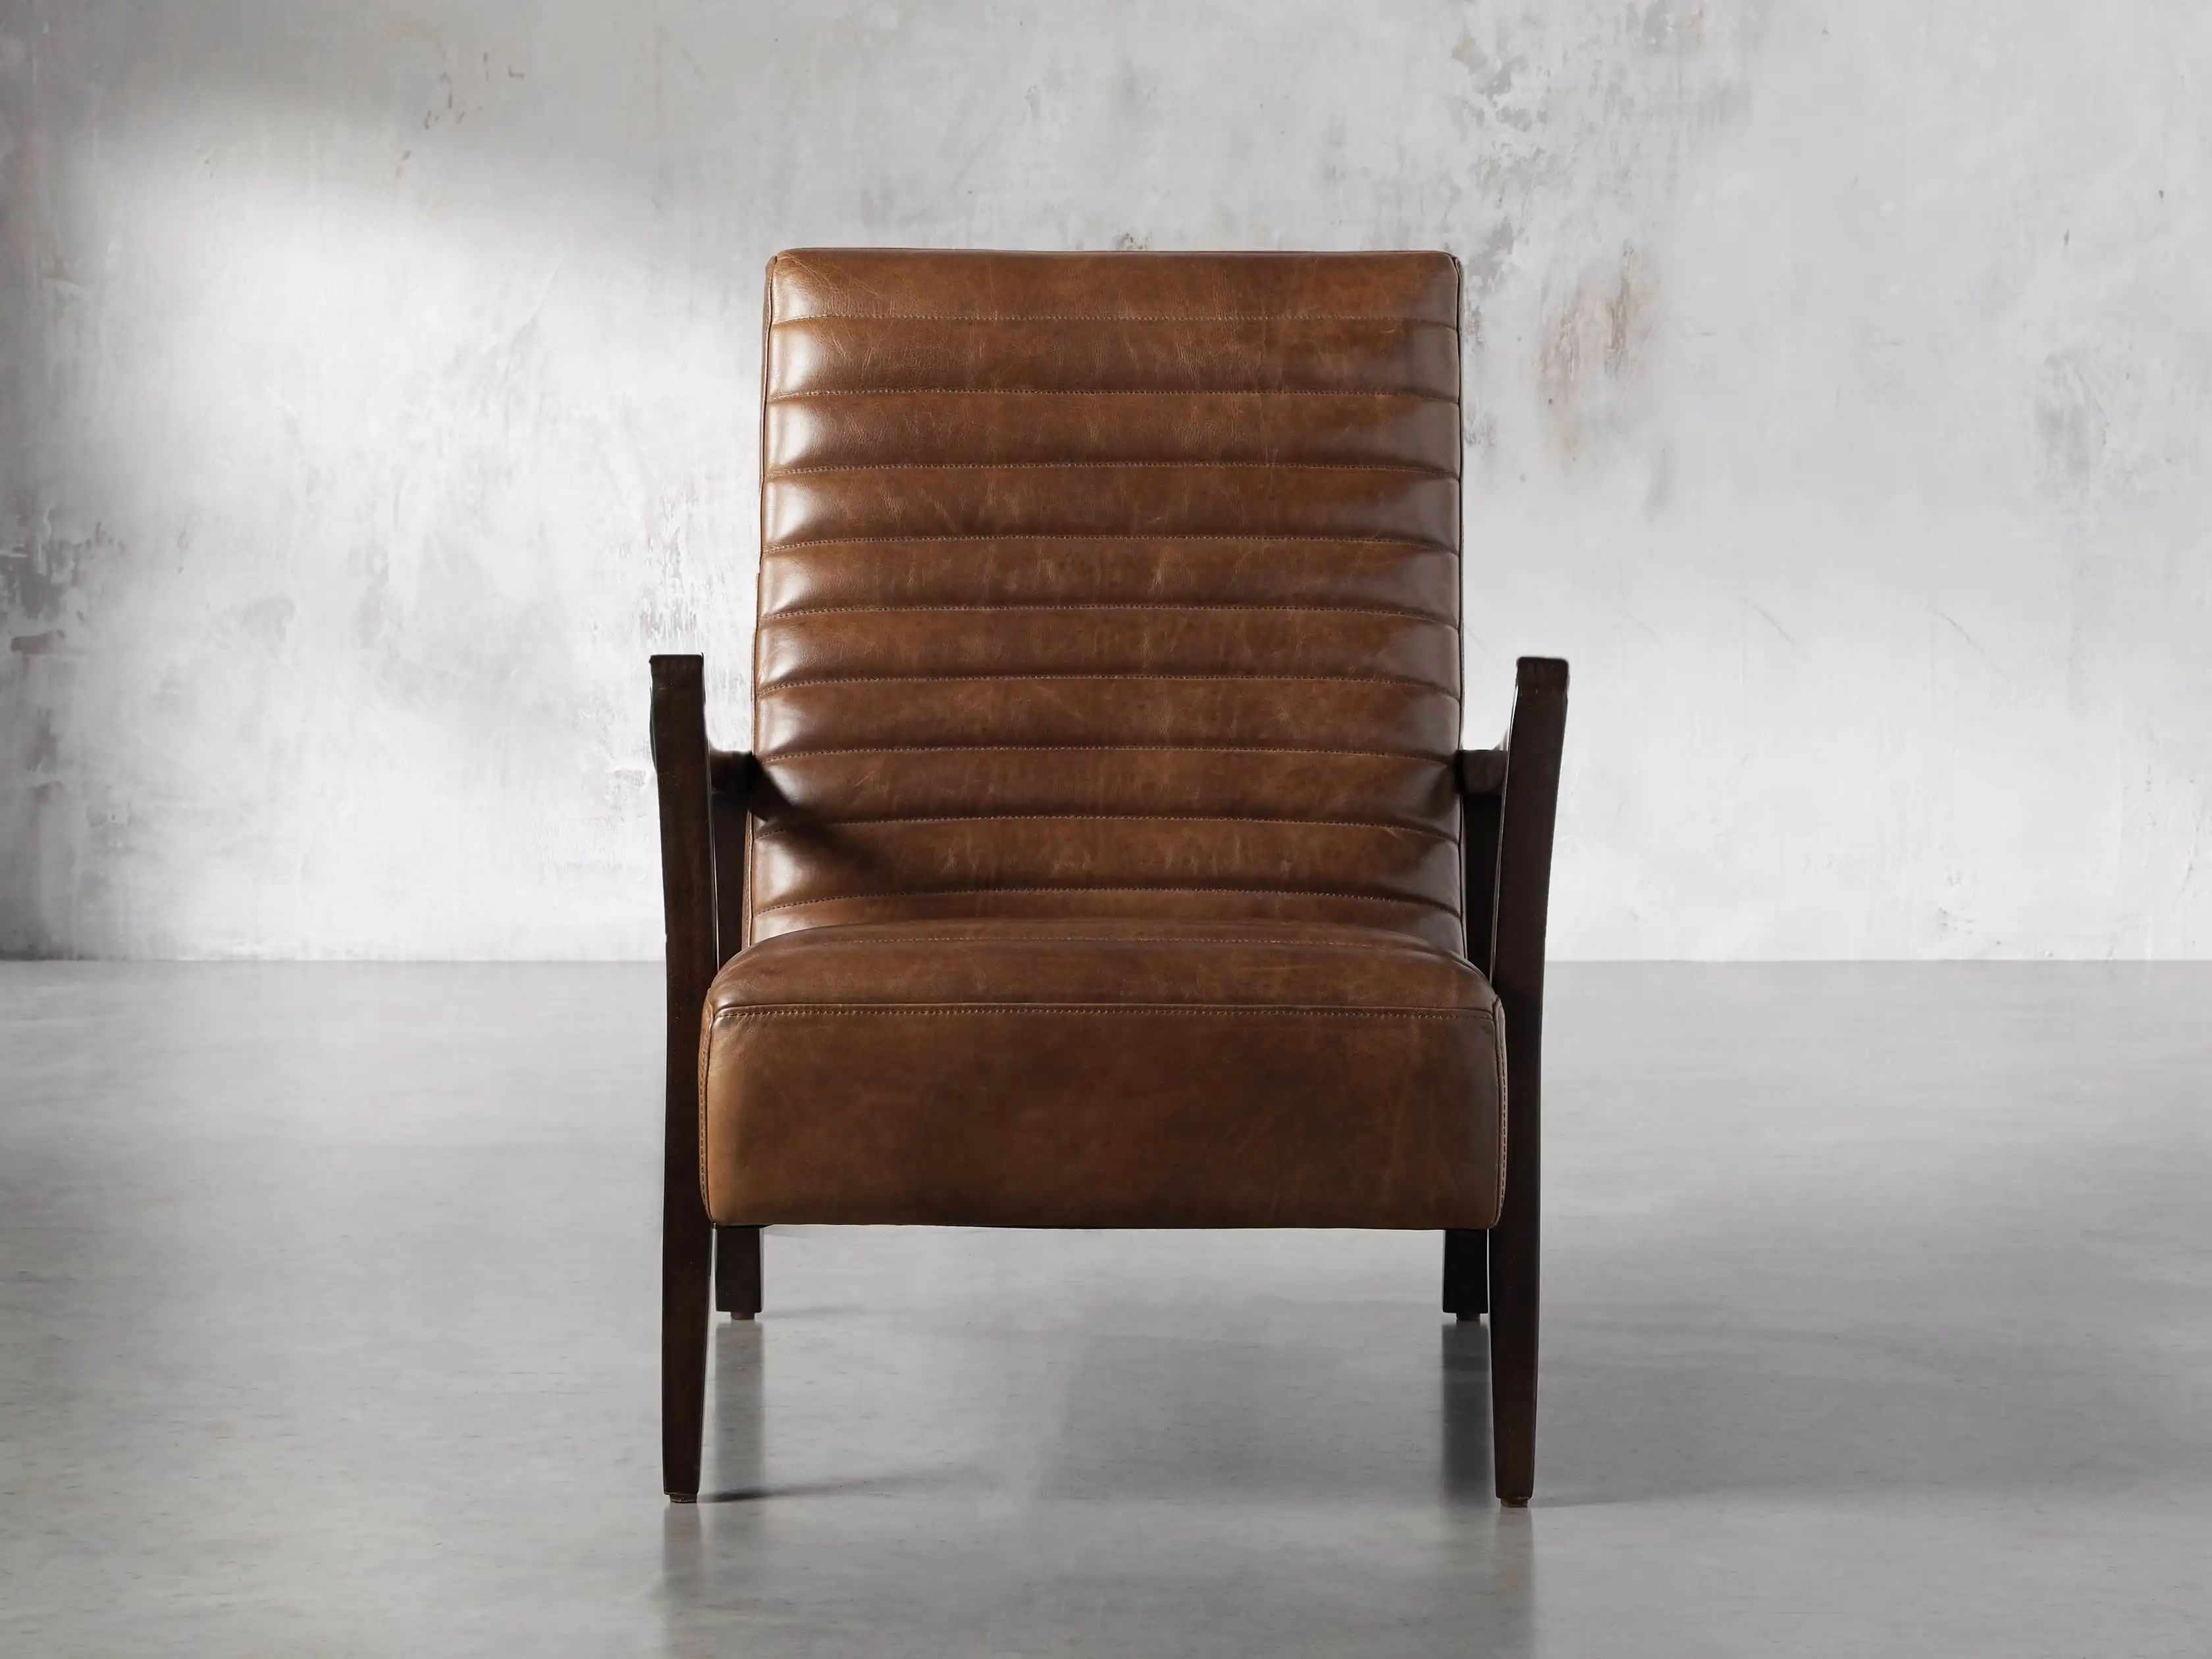 Pryor Leather 27"" Chair in Momento Token | Arhaus